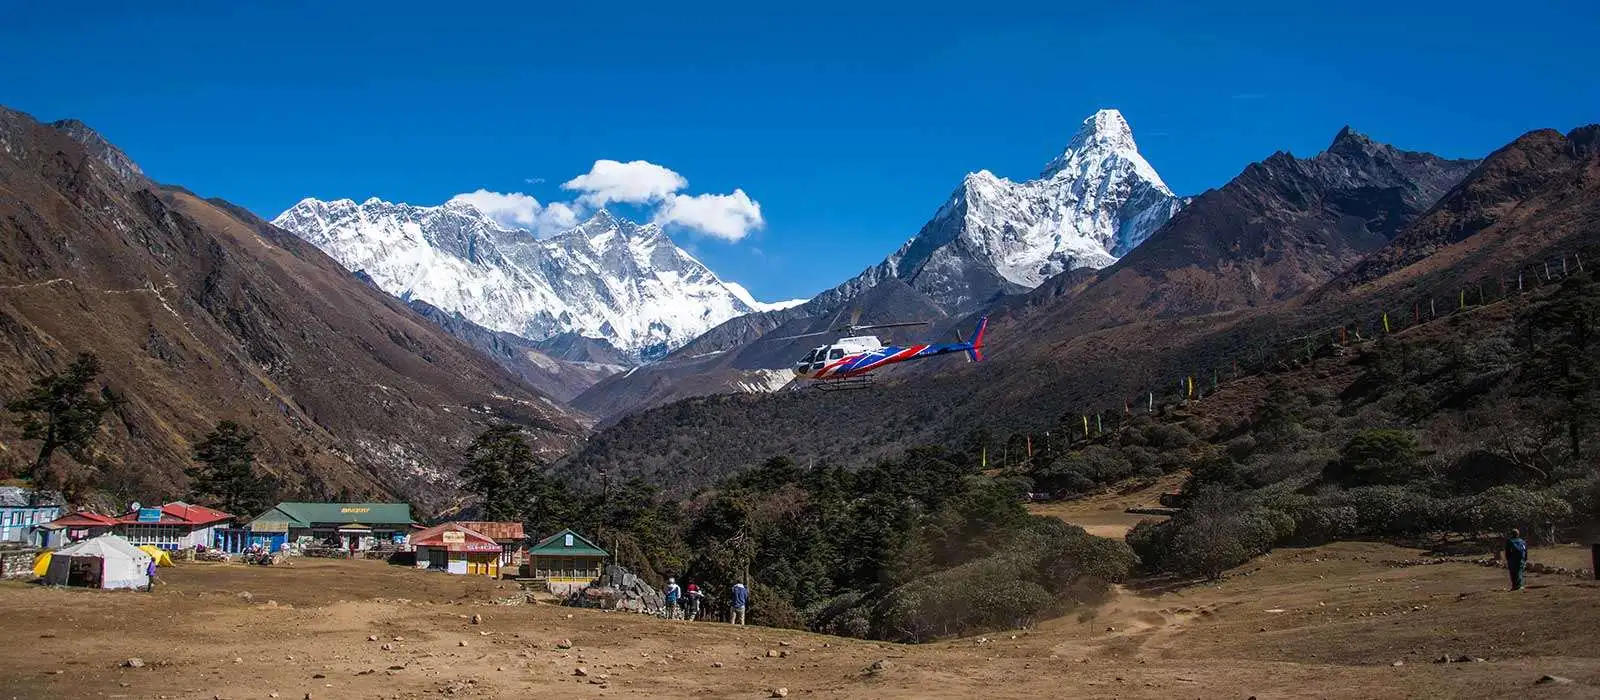 Everest Base Camp Trek and Fly back by helicopter